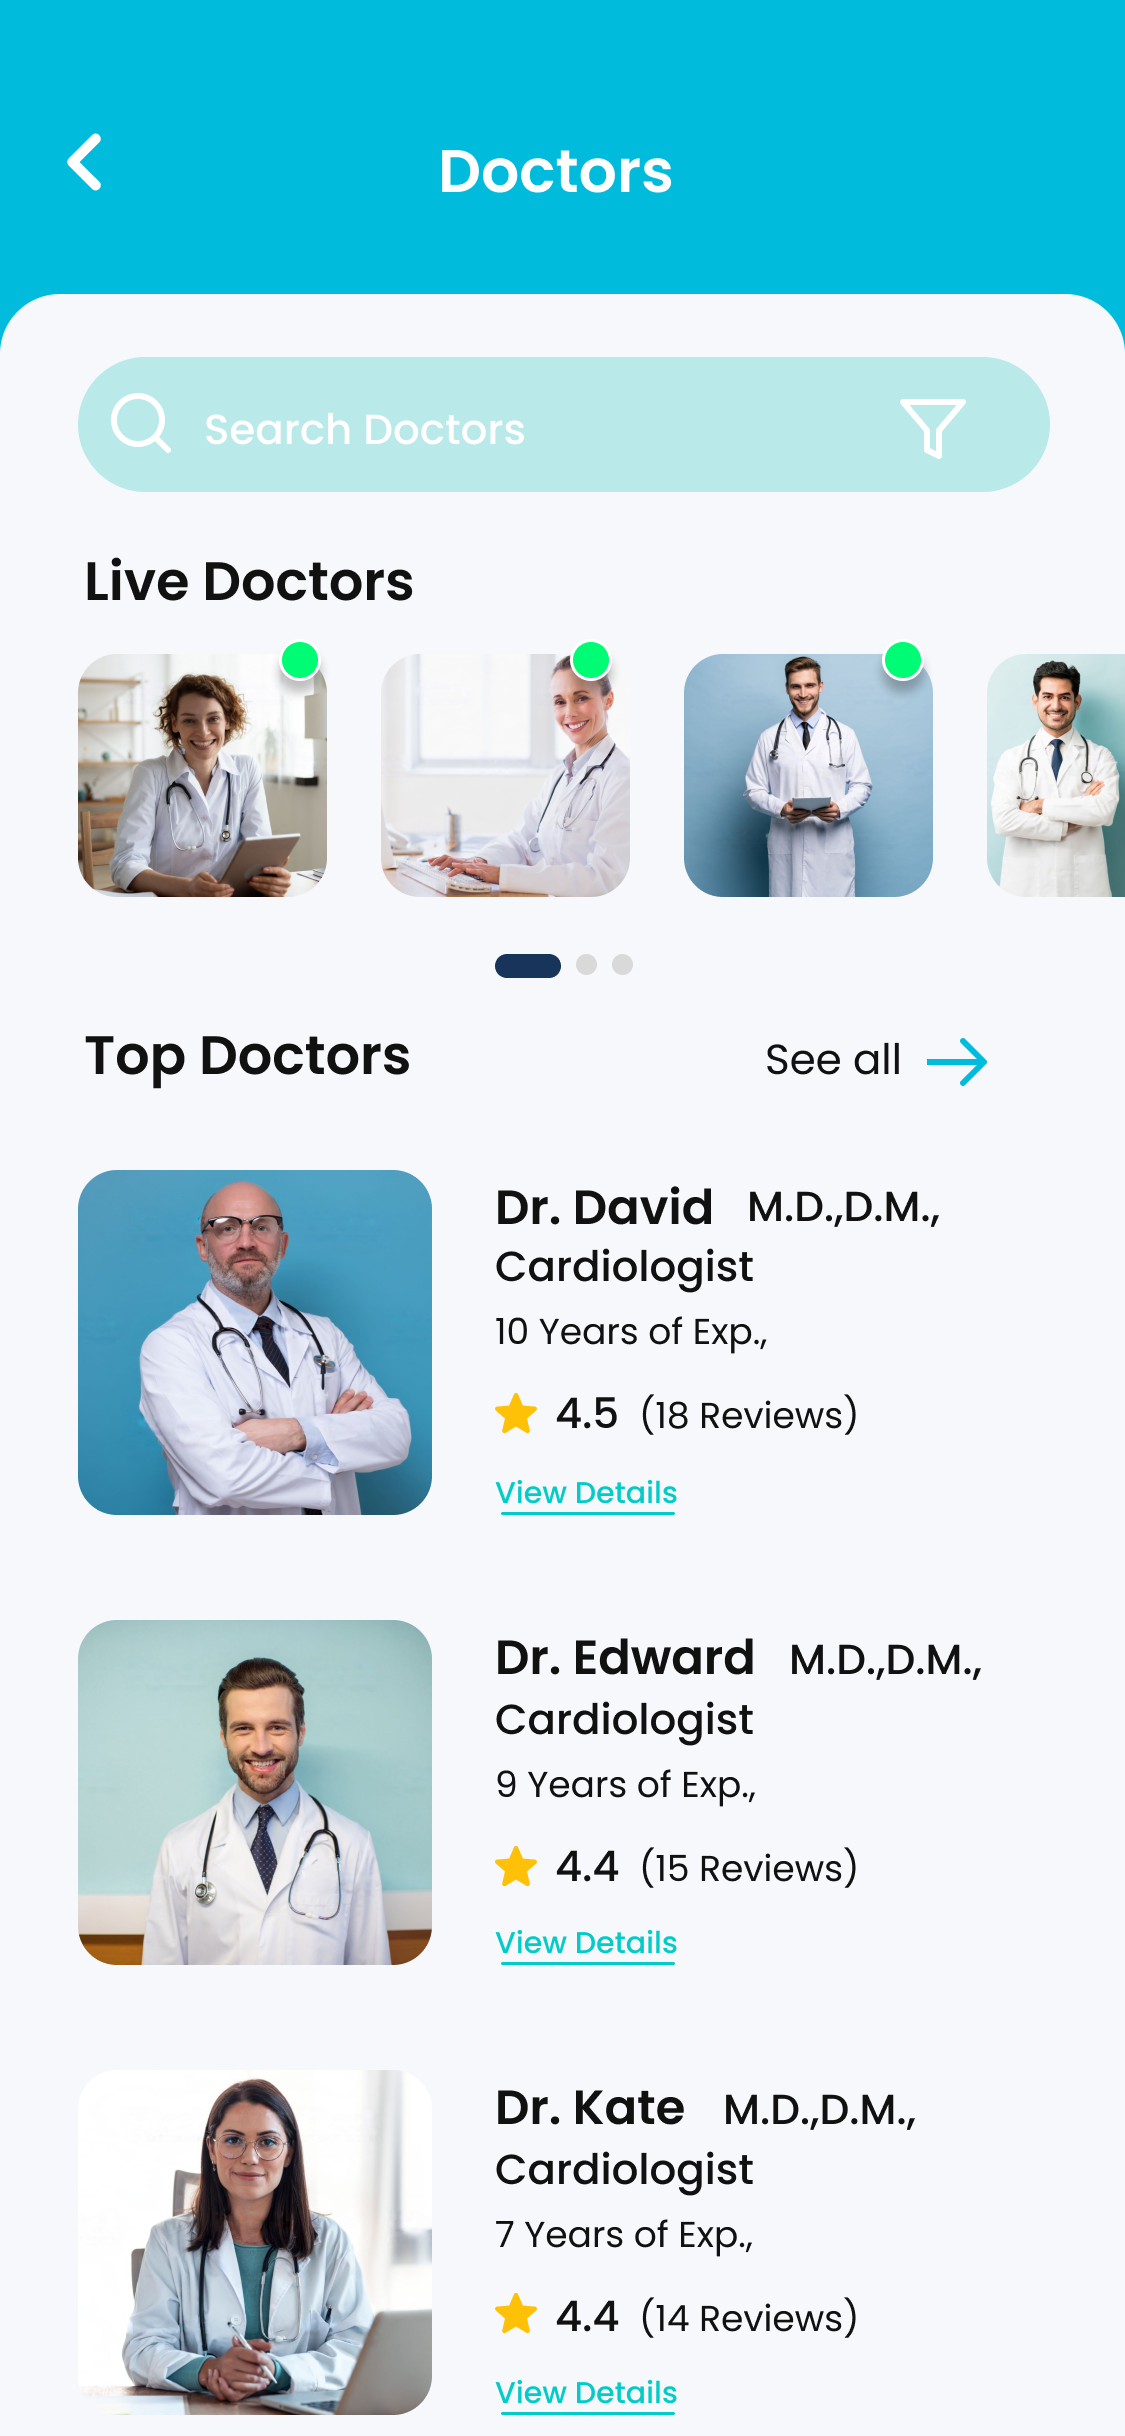 appdevelopers appdevelopmentcompany clinic doctor doctorconsultationapp healthcare Mobile app MobileAppDevelopment PoulimaInfotech UI/UX